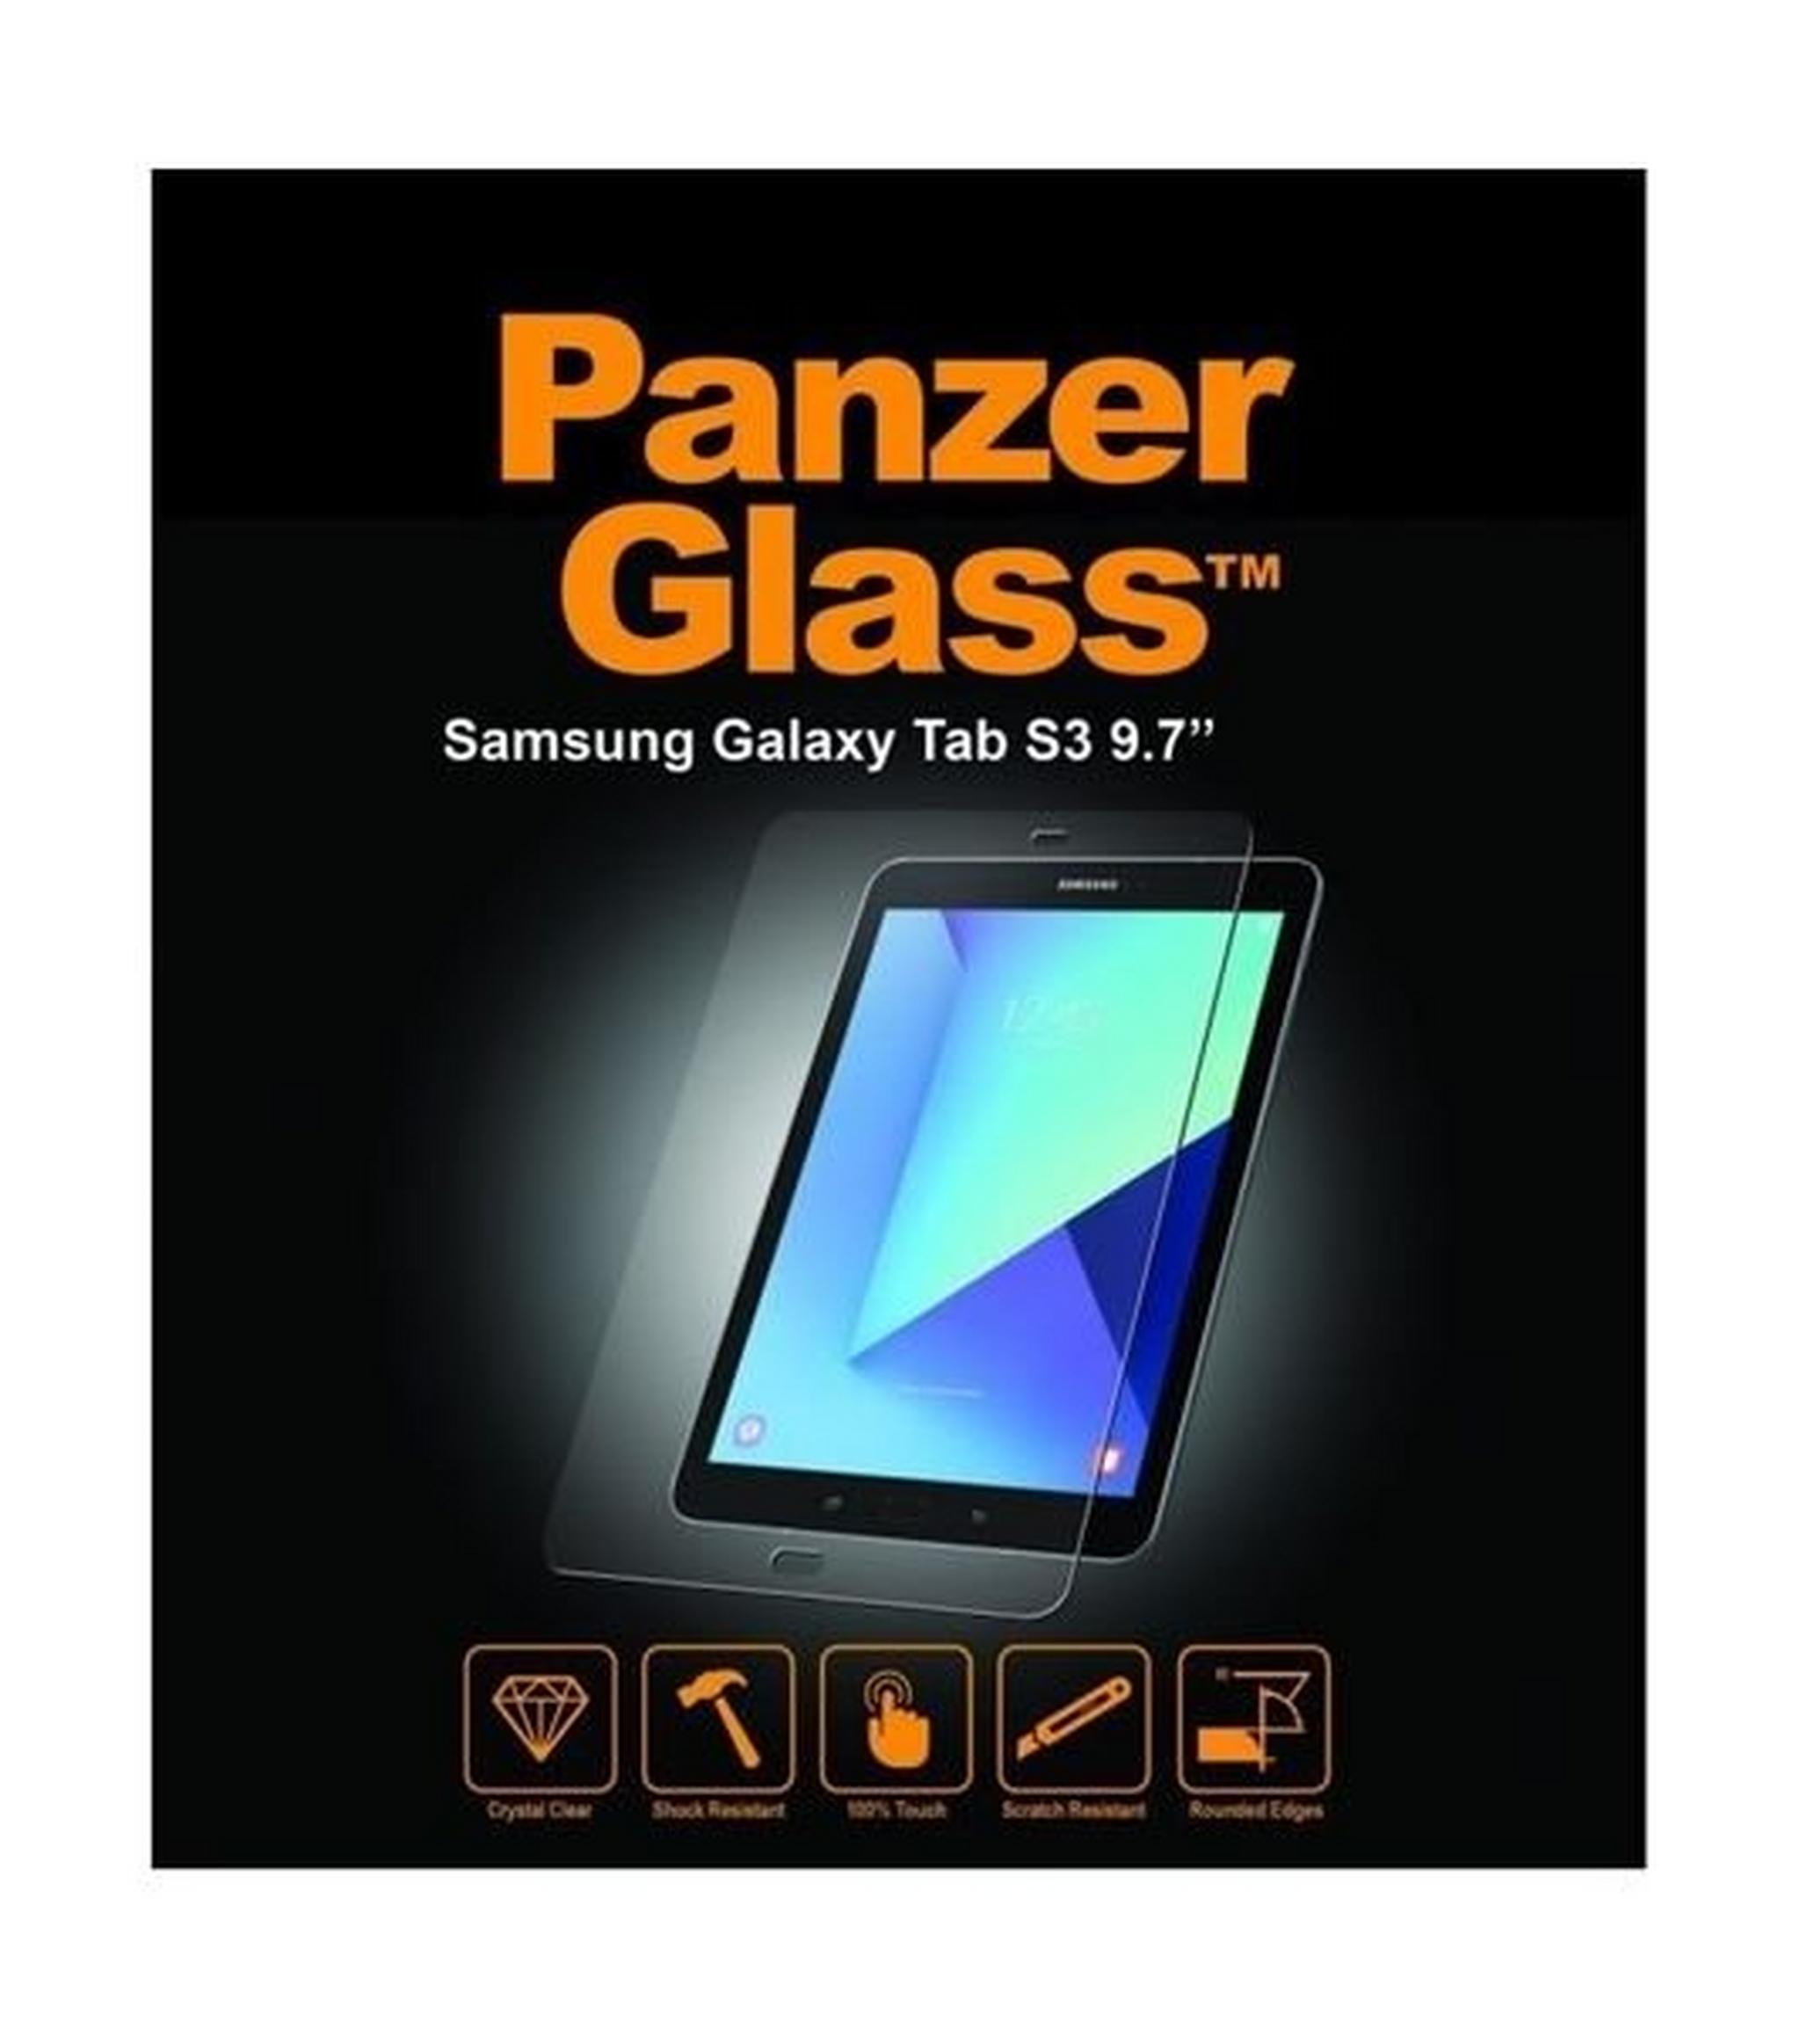 Panzer Glass Premium Screen Protector For Samsung Galaxy Tab S3 9.7 (7118) – Clear